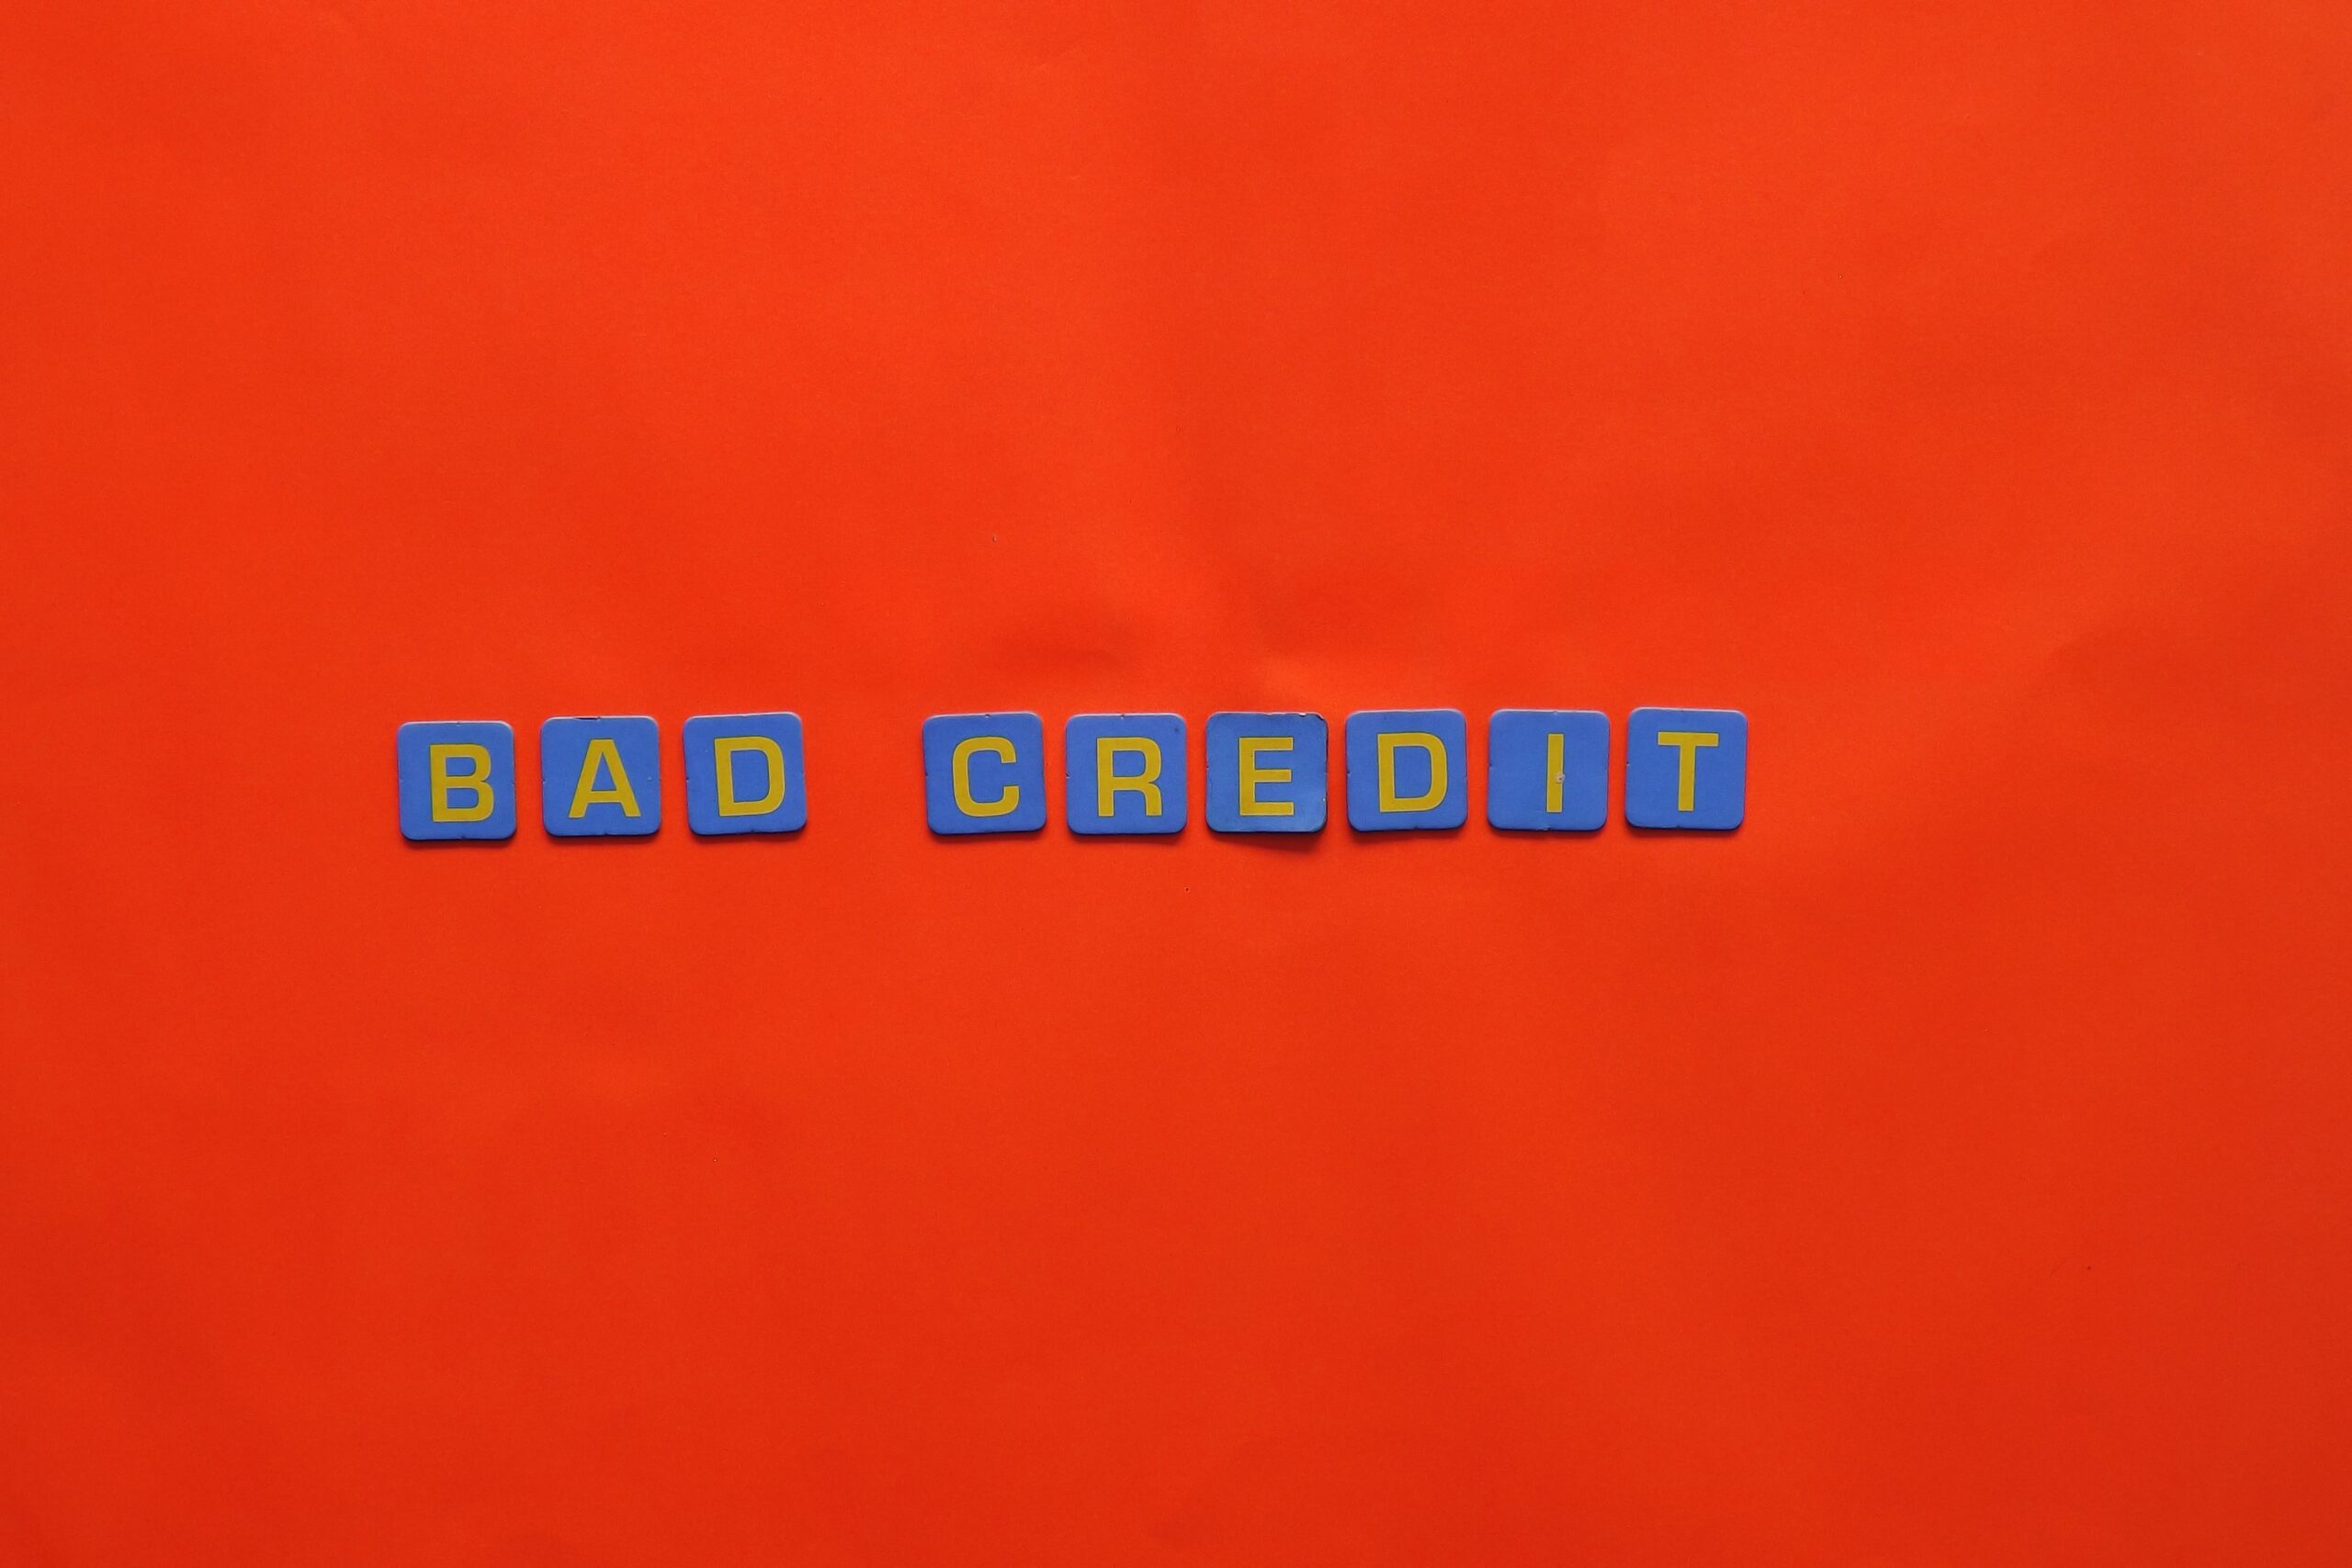 How to get a business loan with bad credit